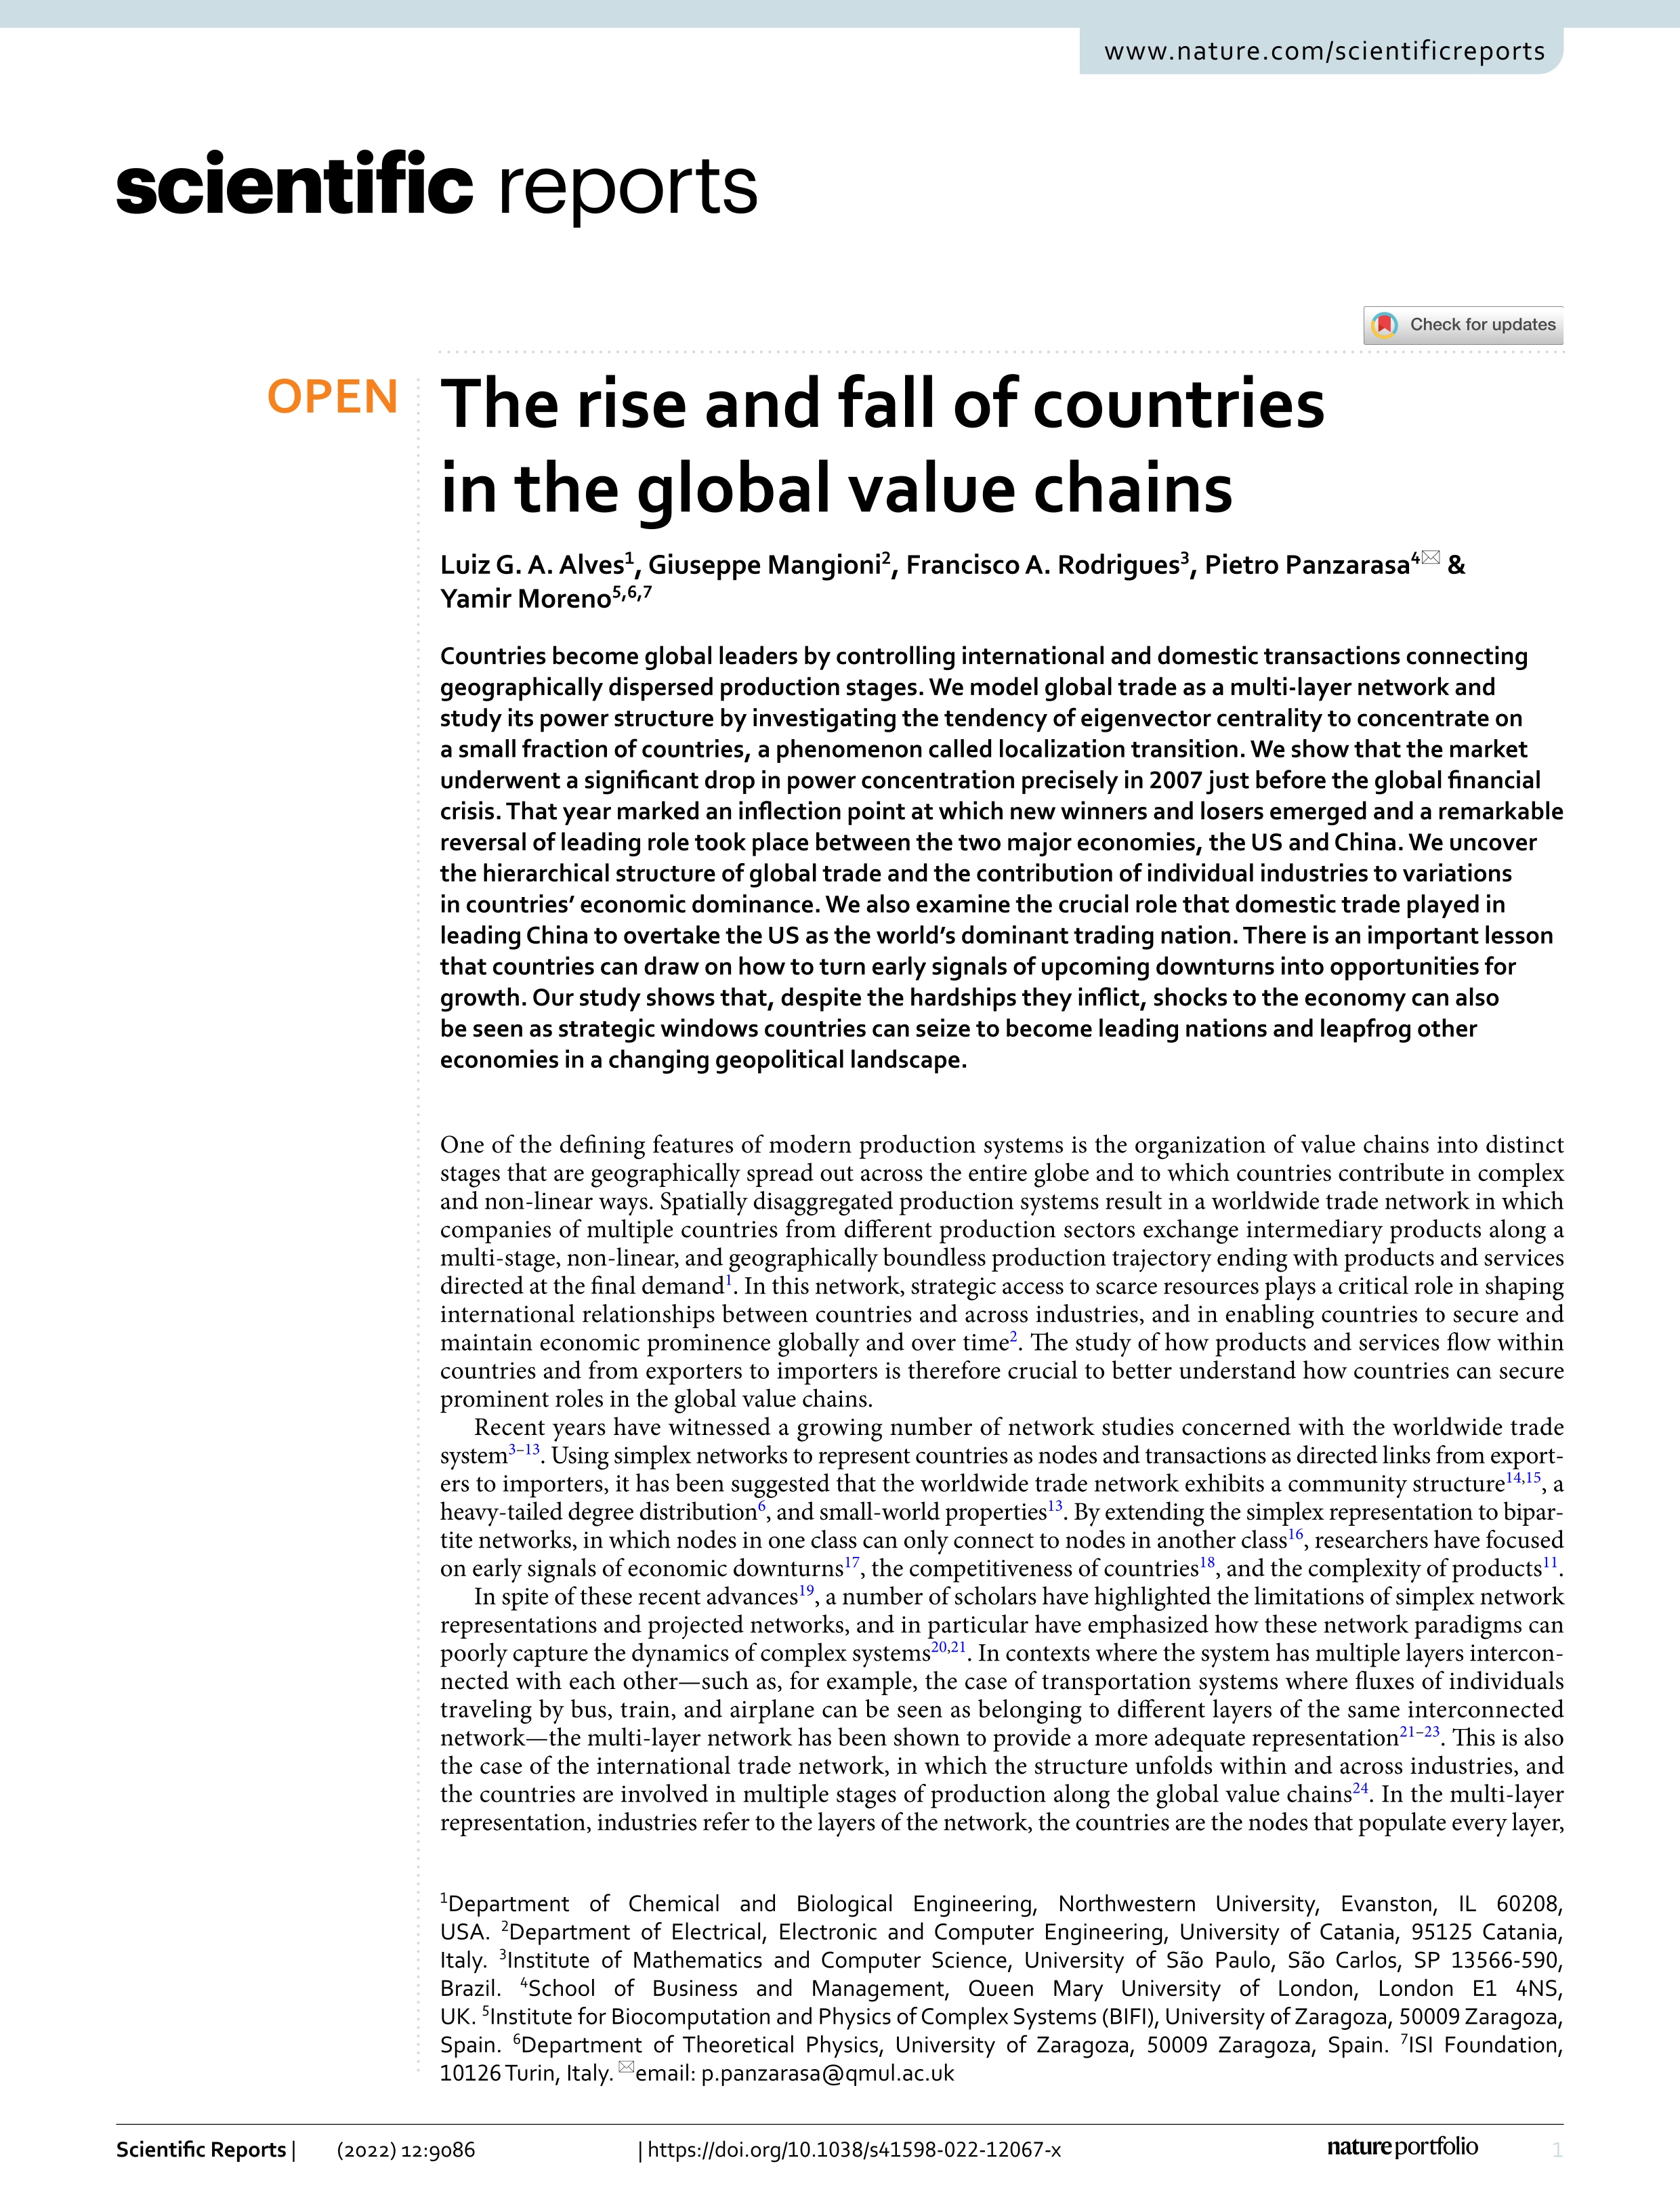 The rise and fall of countries in the global value chains